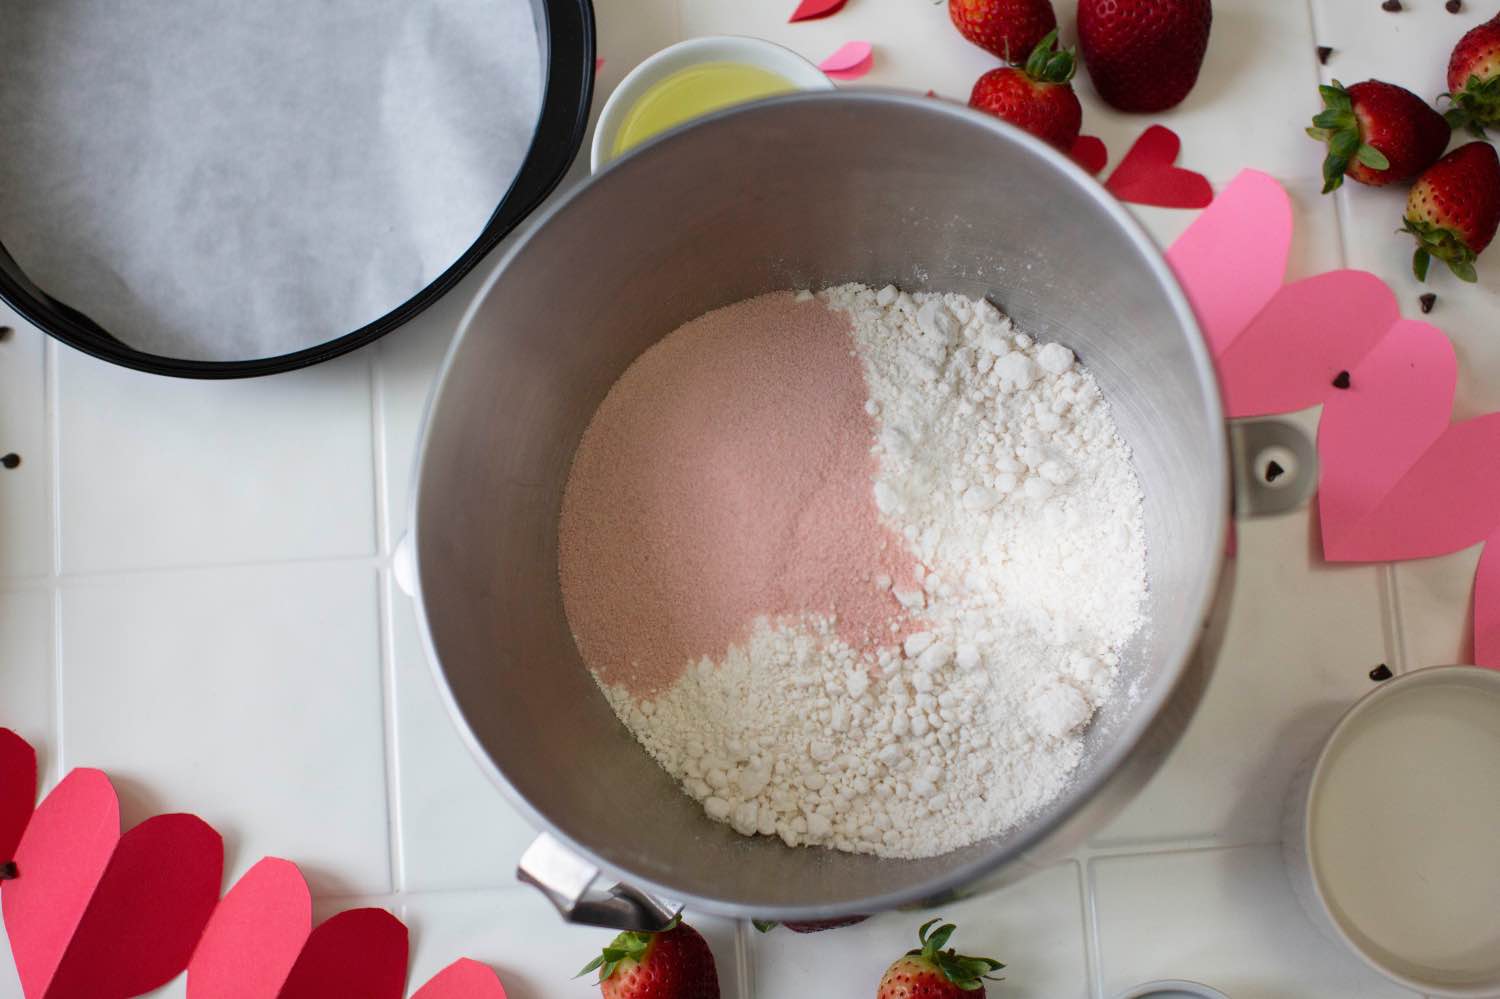 add the strawberry jello to the dry mix for strawberry cake